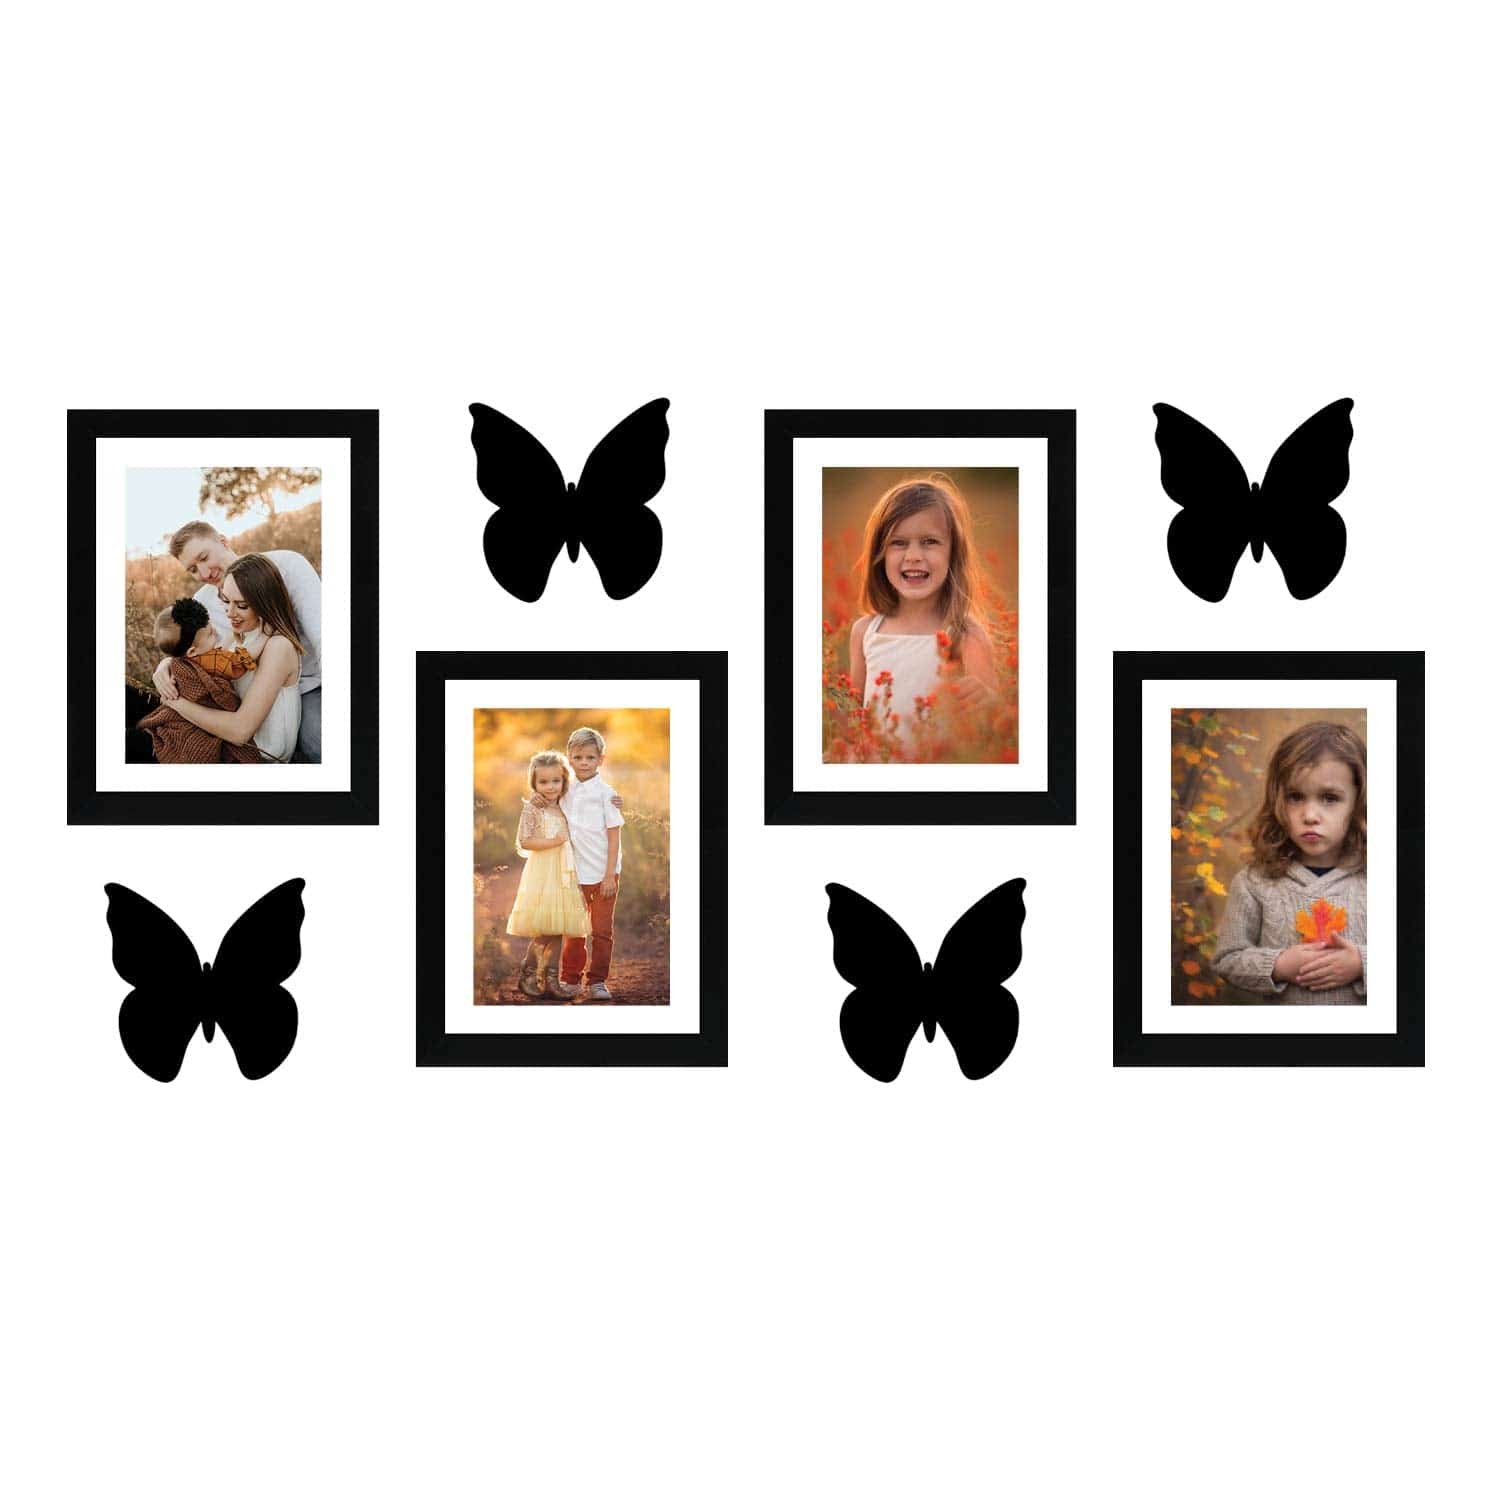 Amazon Brand - Solimo Set Of 4 Photo Frames With Mount Paper & 4 Butterfly Plaque (6 X 8 Inch - 4), Black, Rectangular, wall mount - YuvaFlowers